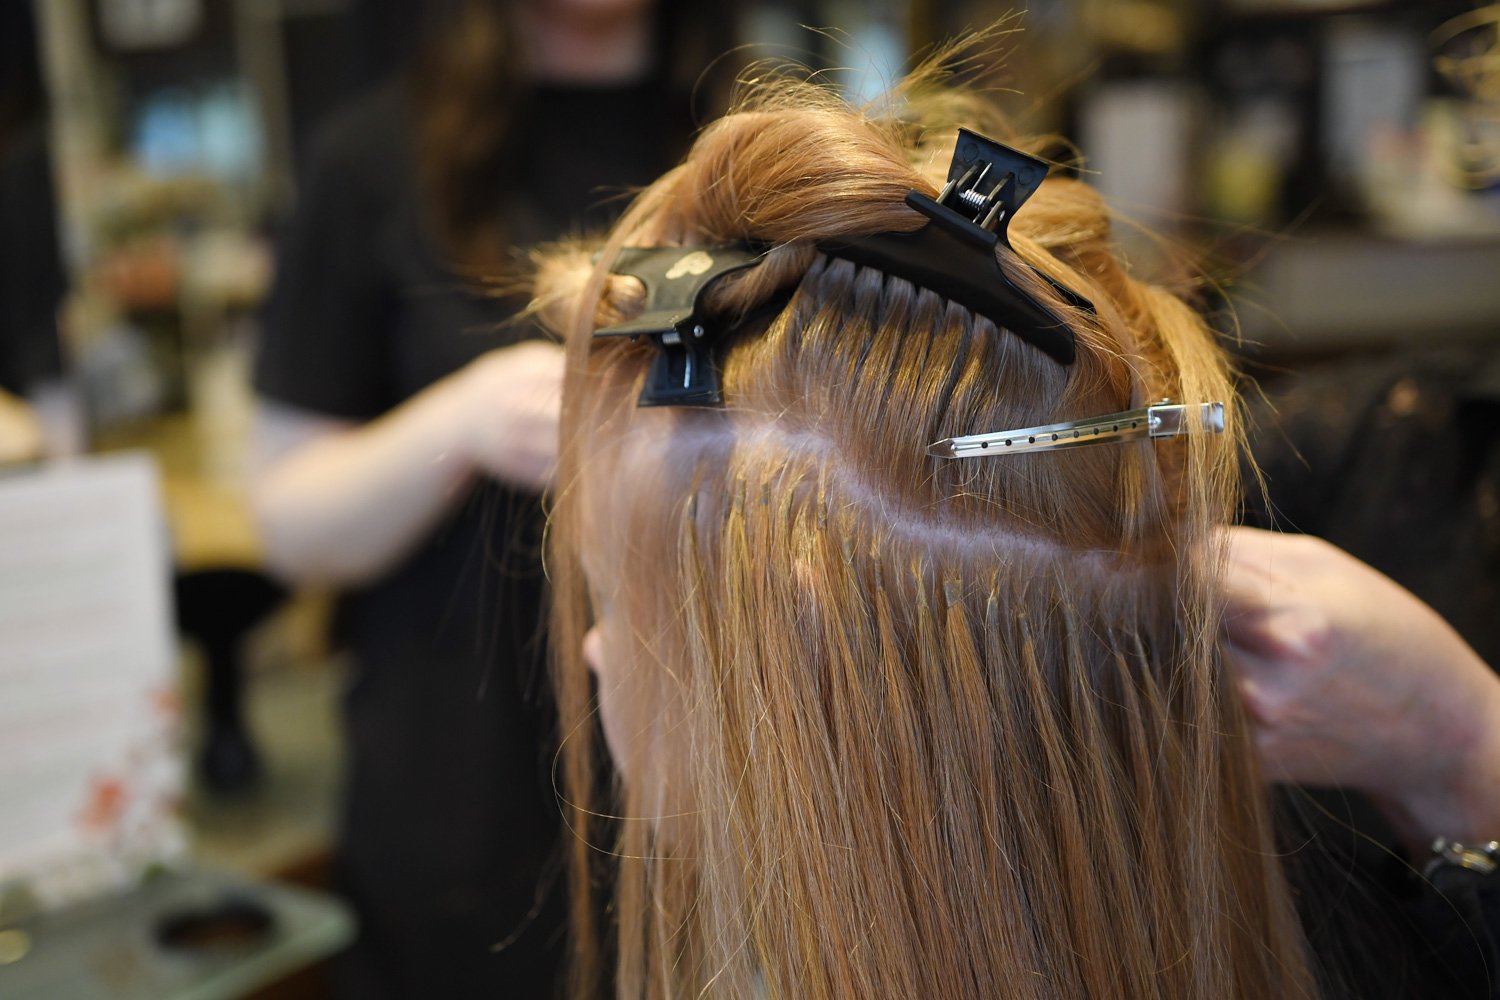 Great Length bonds being applied to hair 